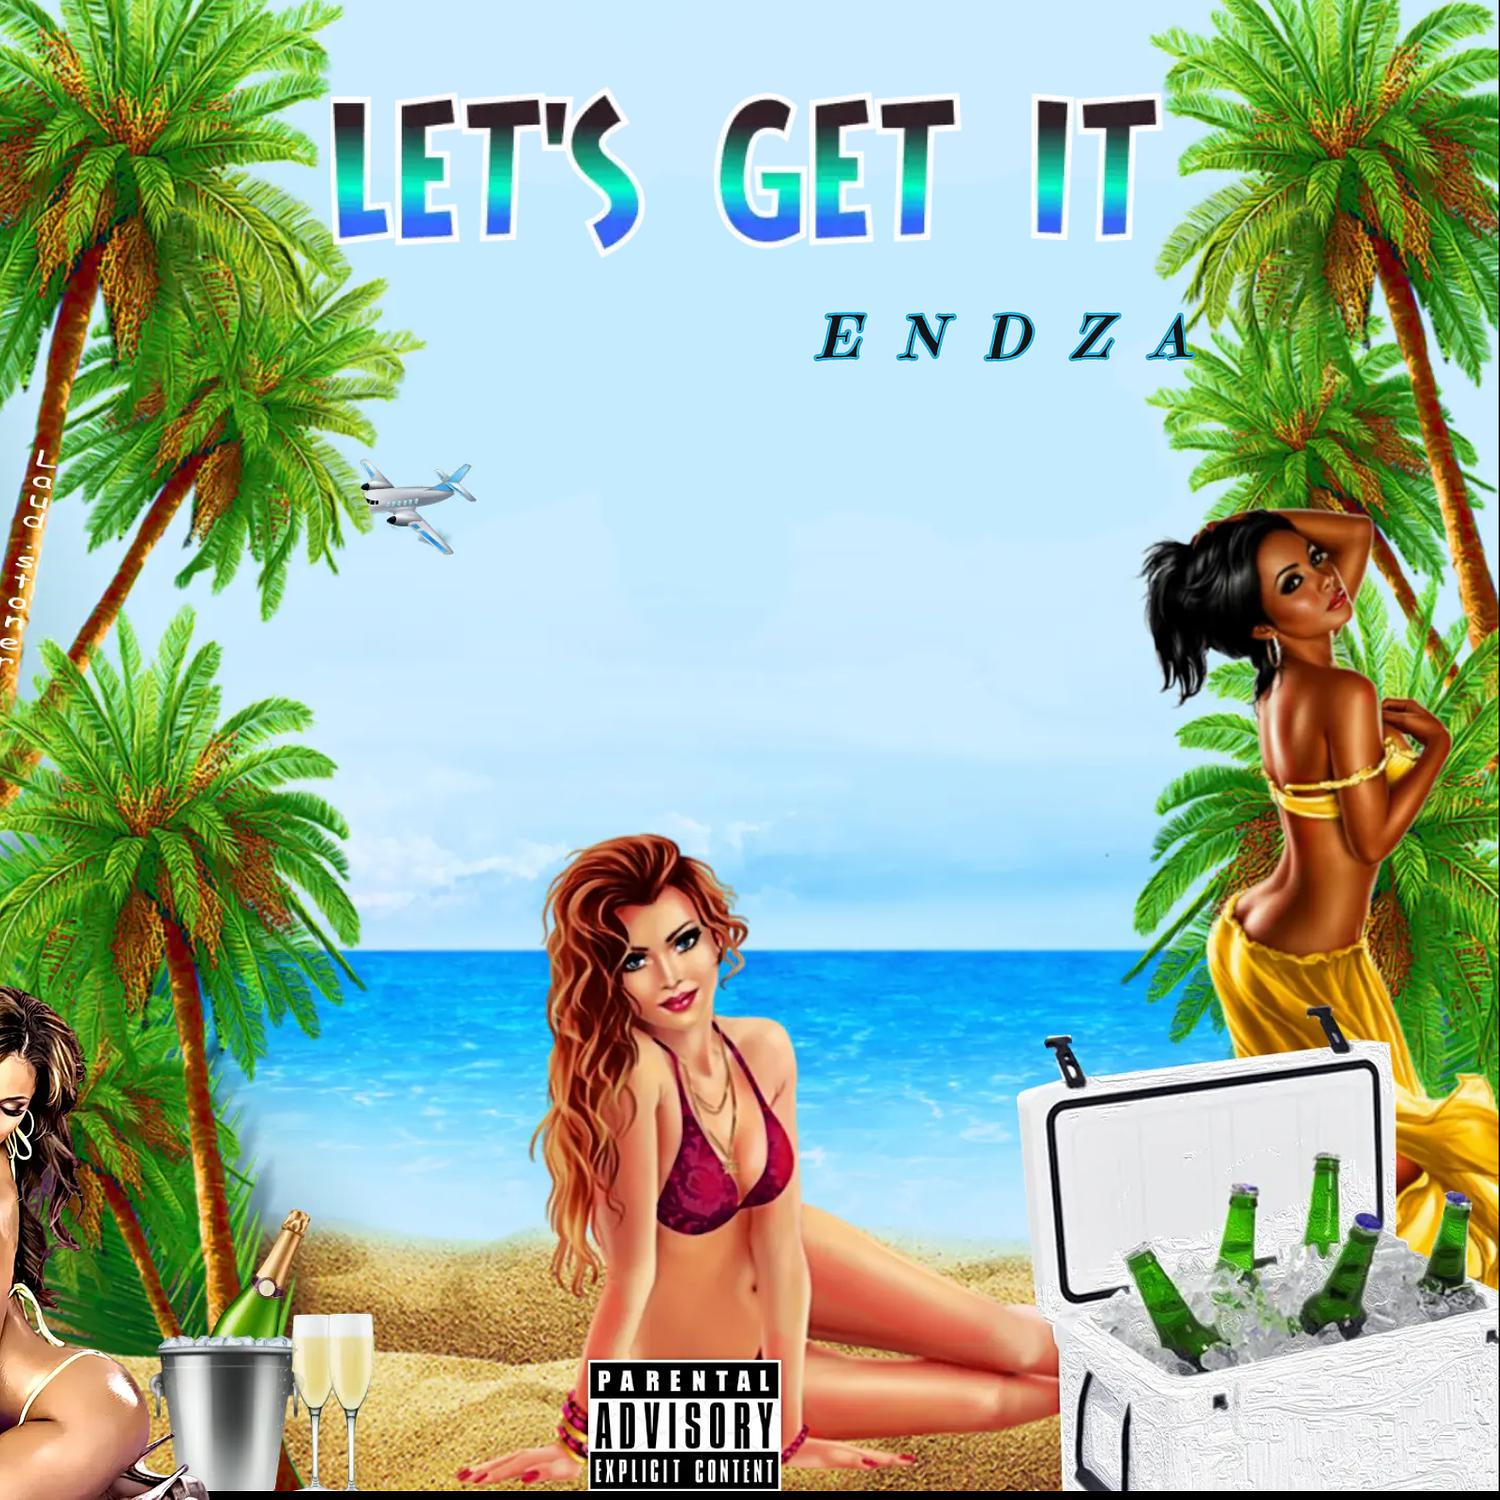 ENDZA - Let's Get It